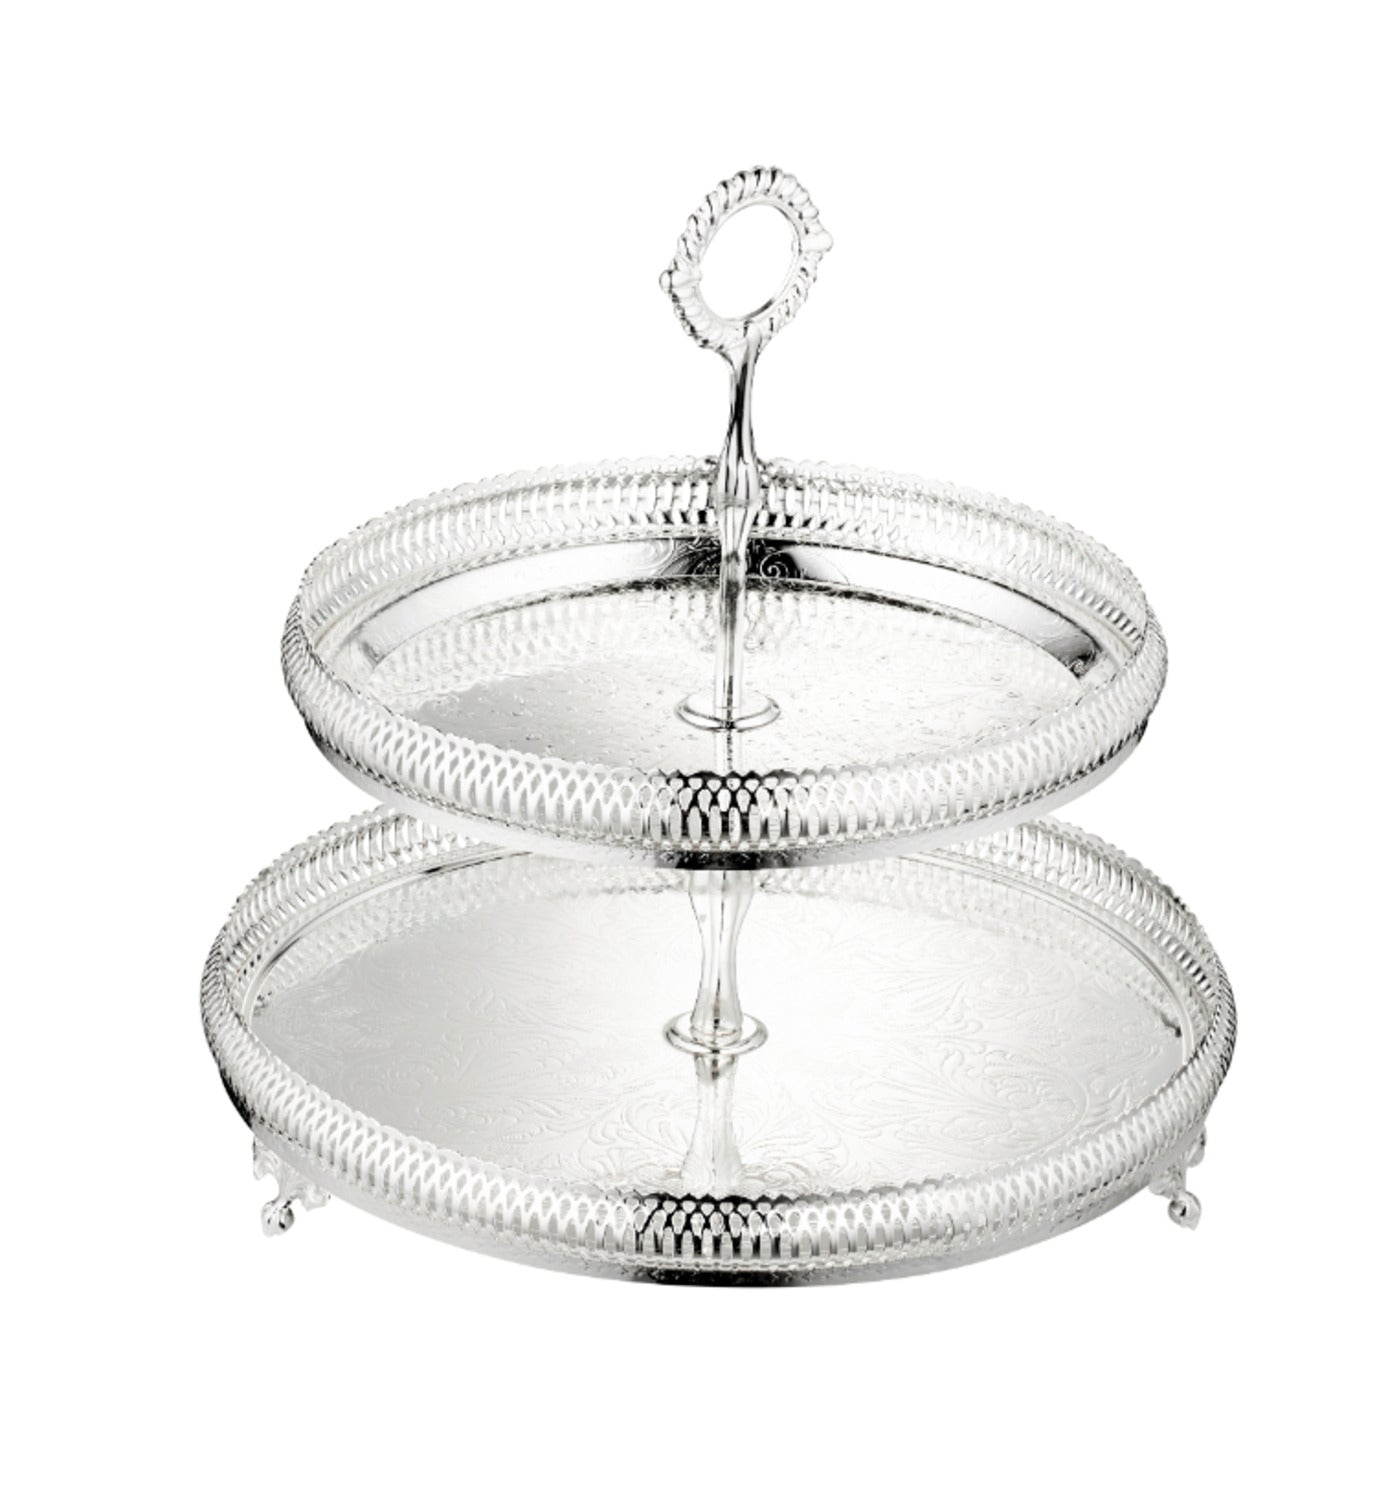 Queen Anne 2 Tier Cake Stand -23&28cm -Silver Plated